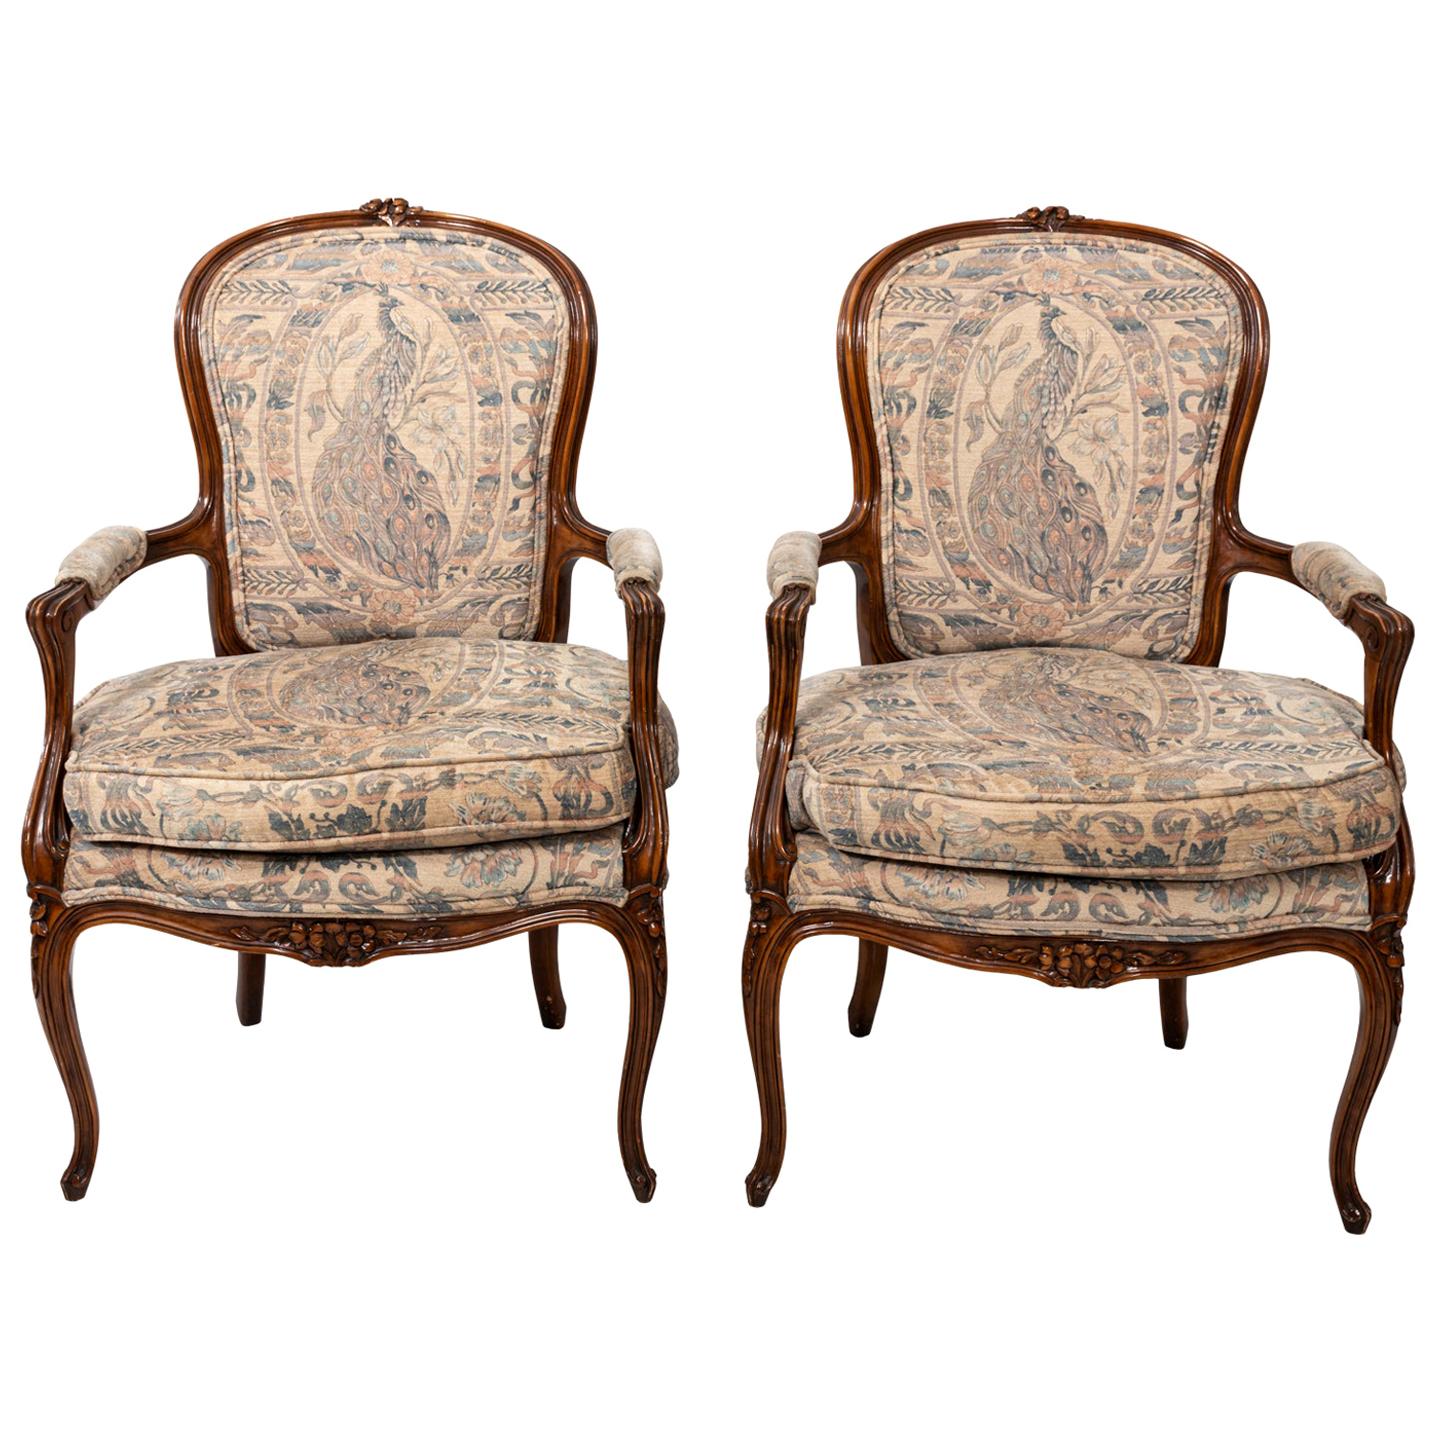 Pair of Carved French Rococo Style Armchairs